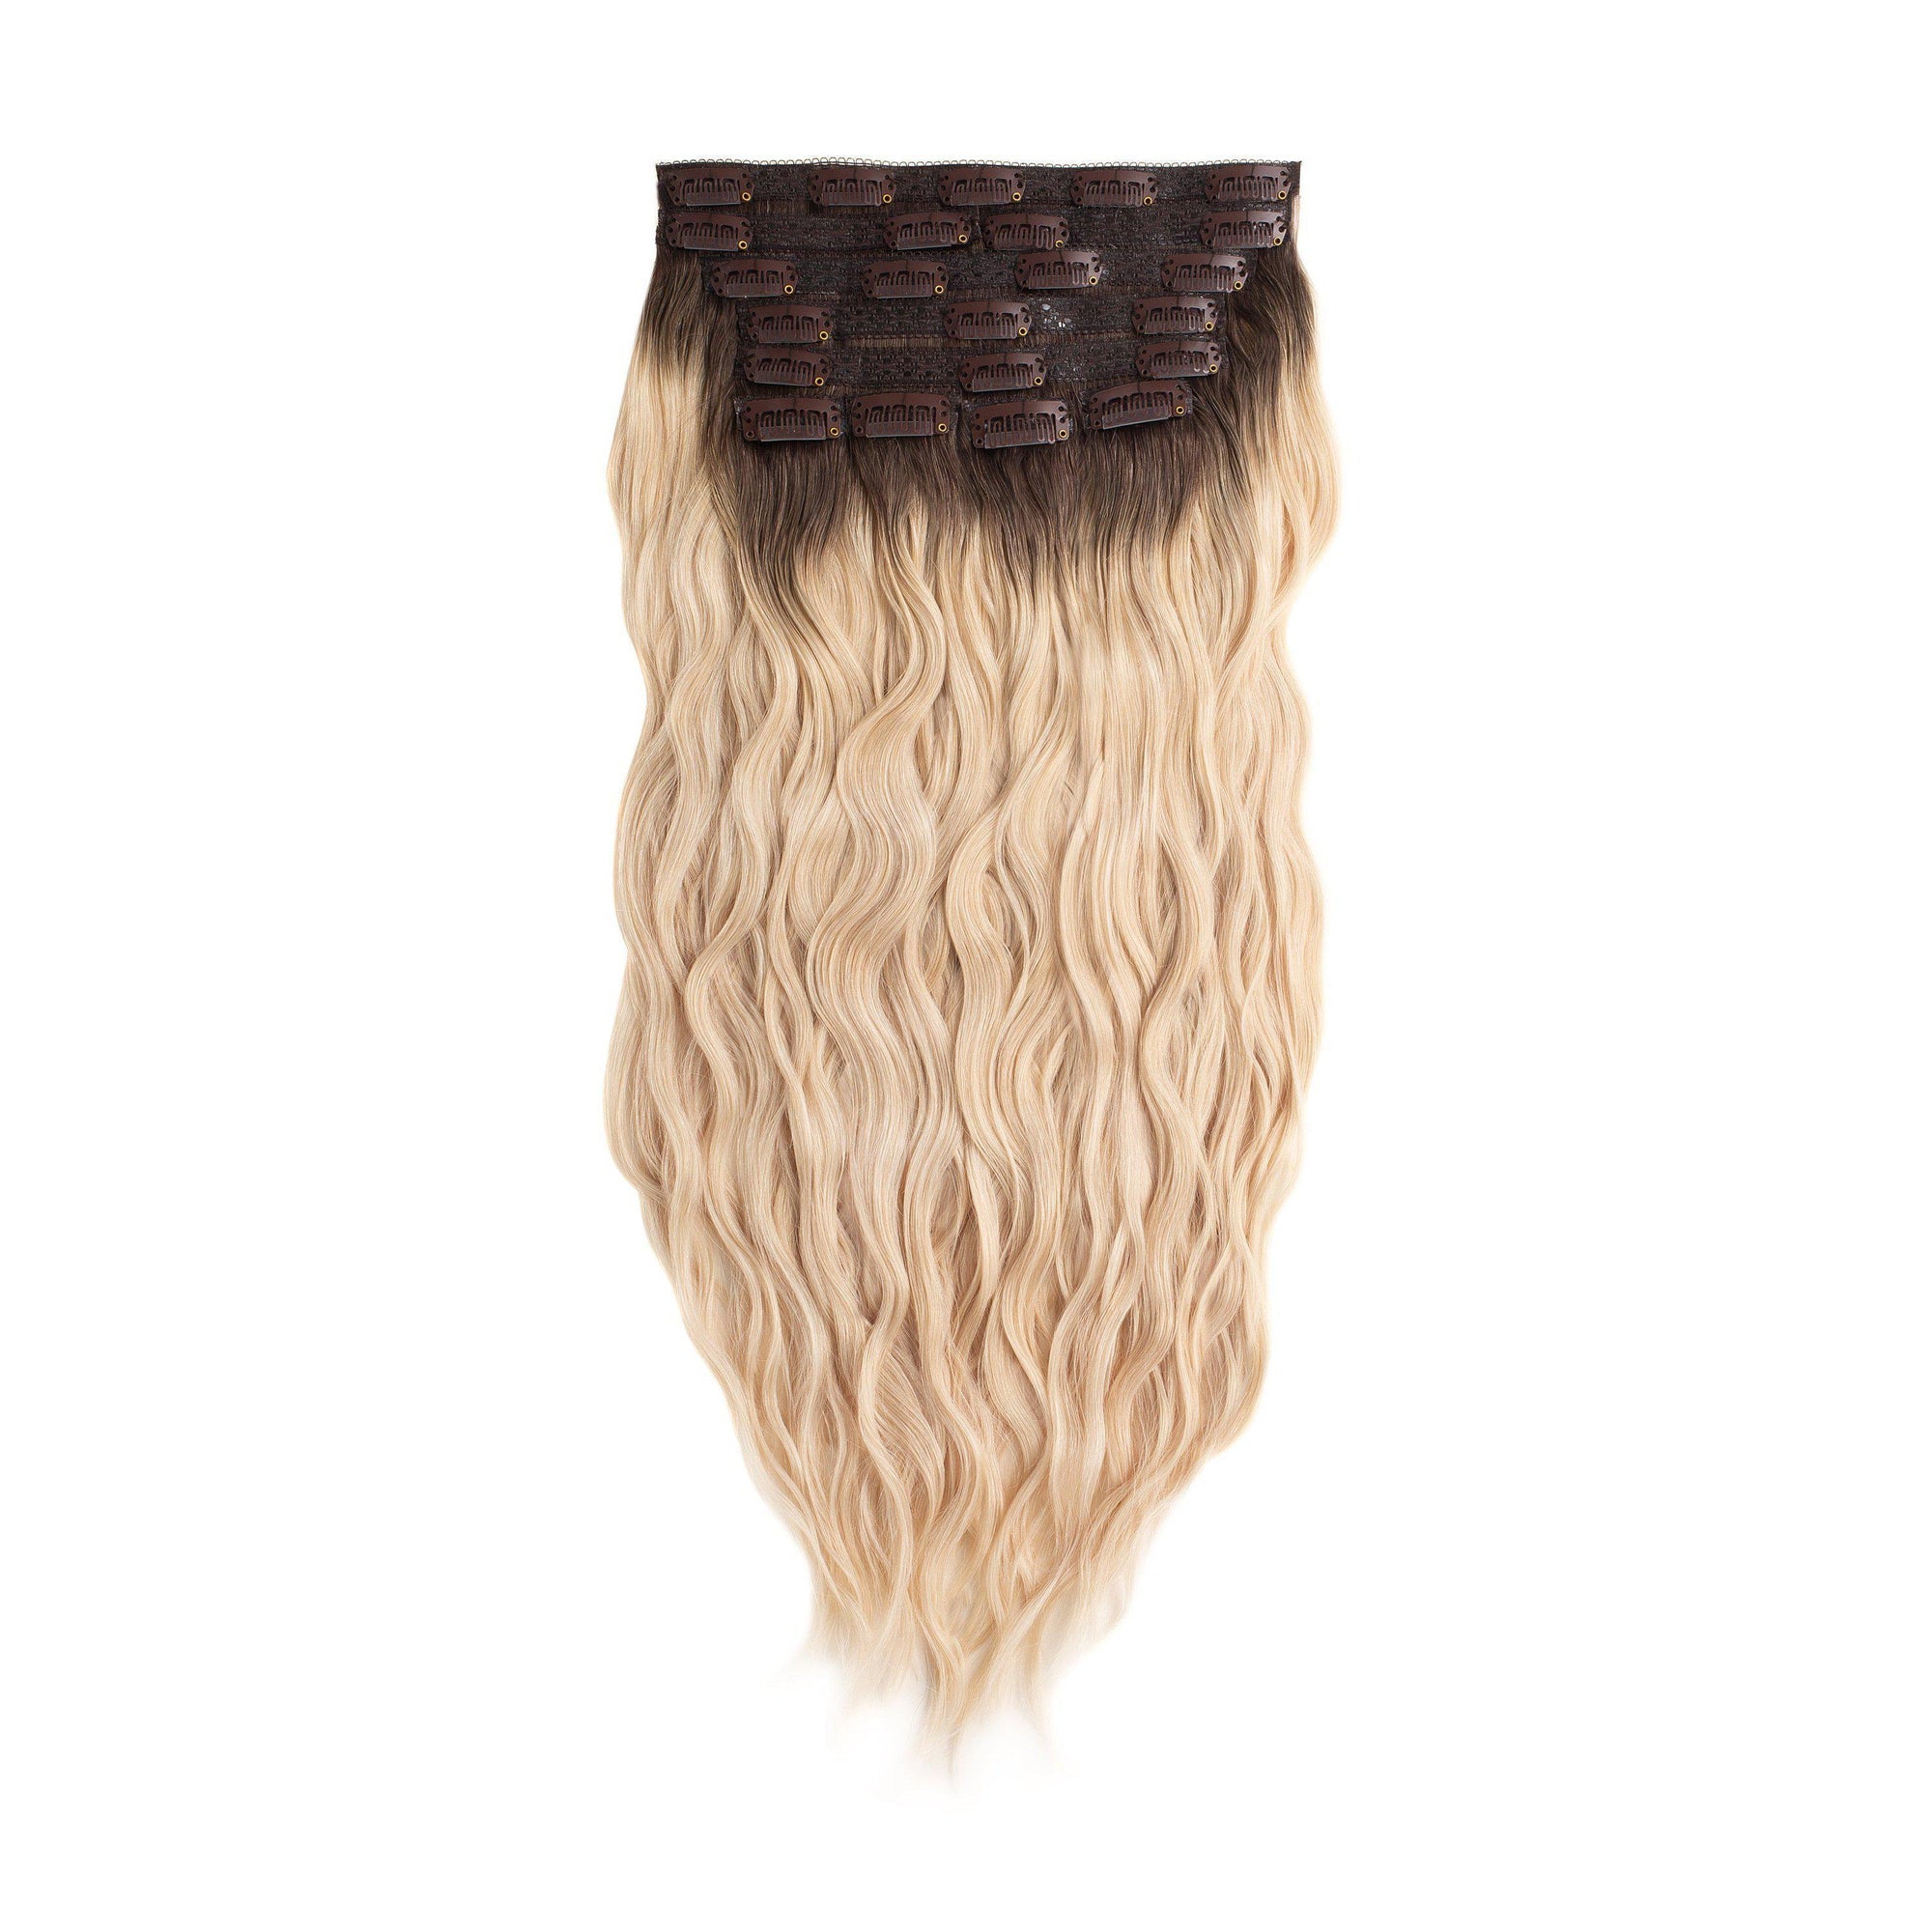 Glam Seamless Beach Wave Invisi Clip Rooted - R60